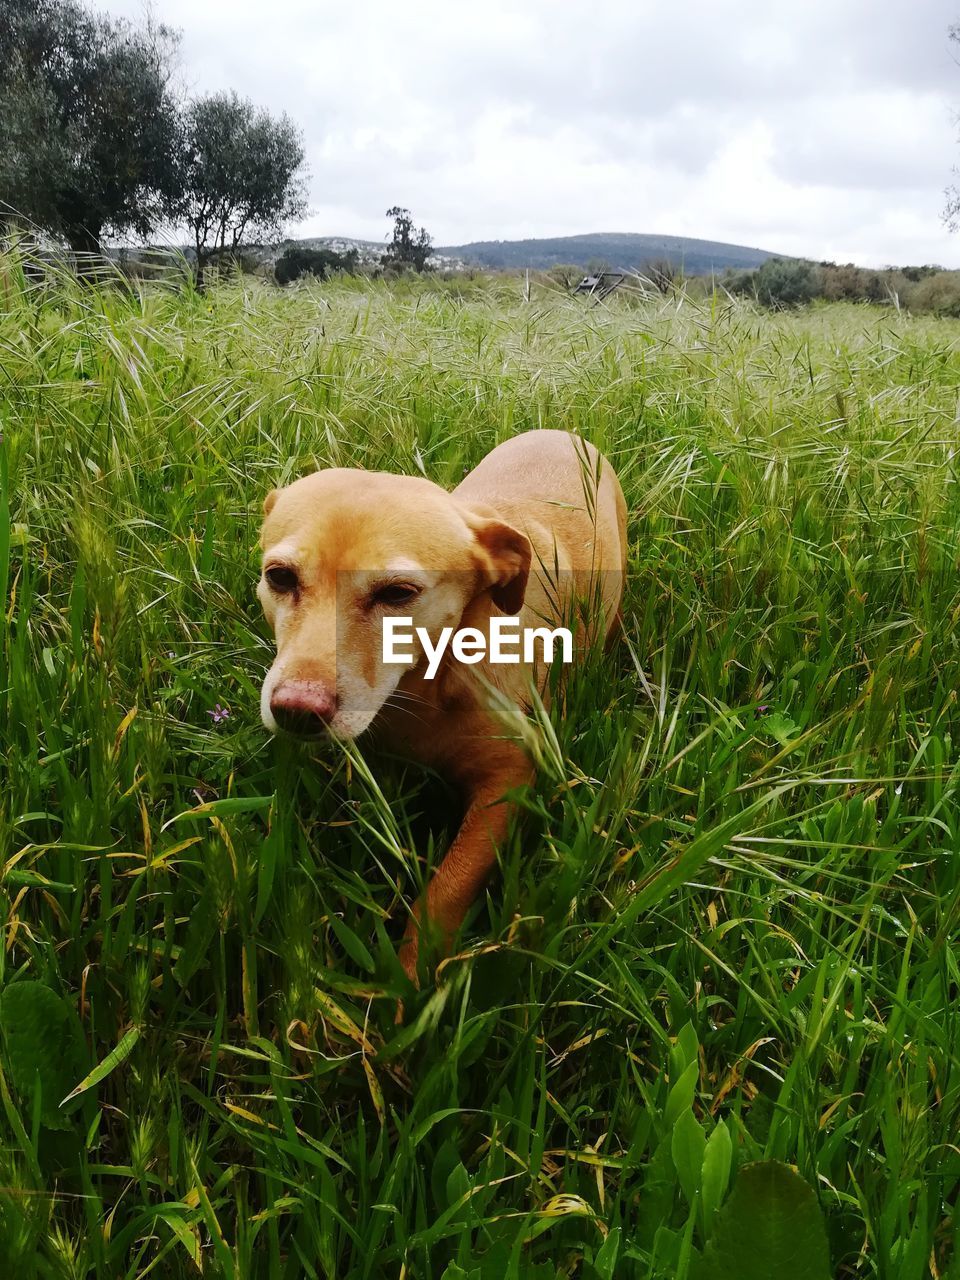 VIEW OF DOG ON GRASS